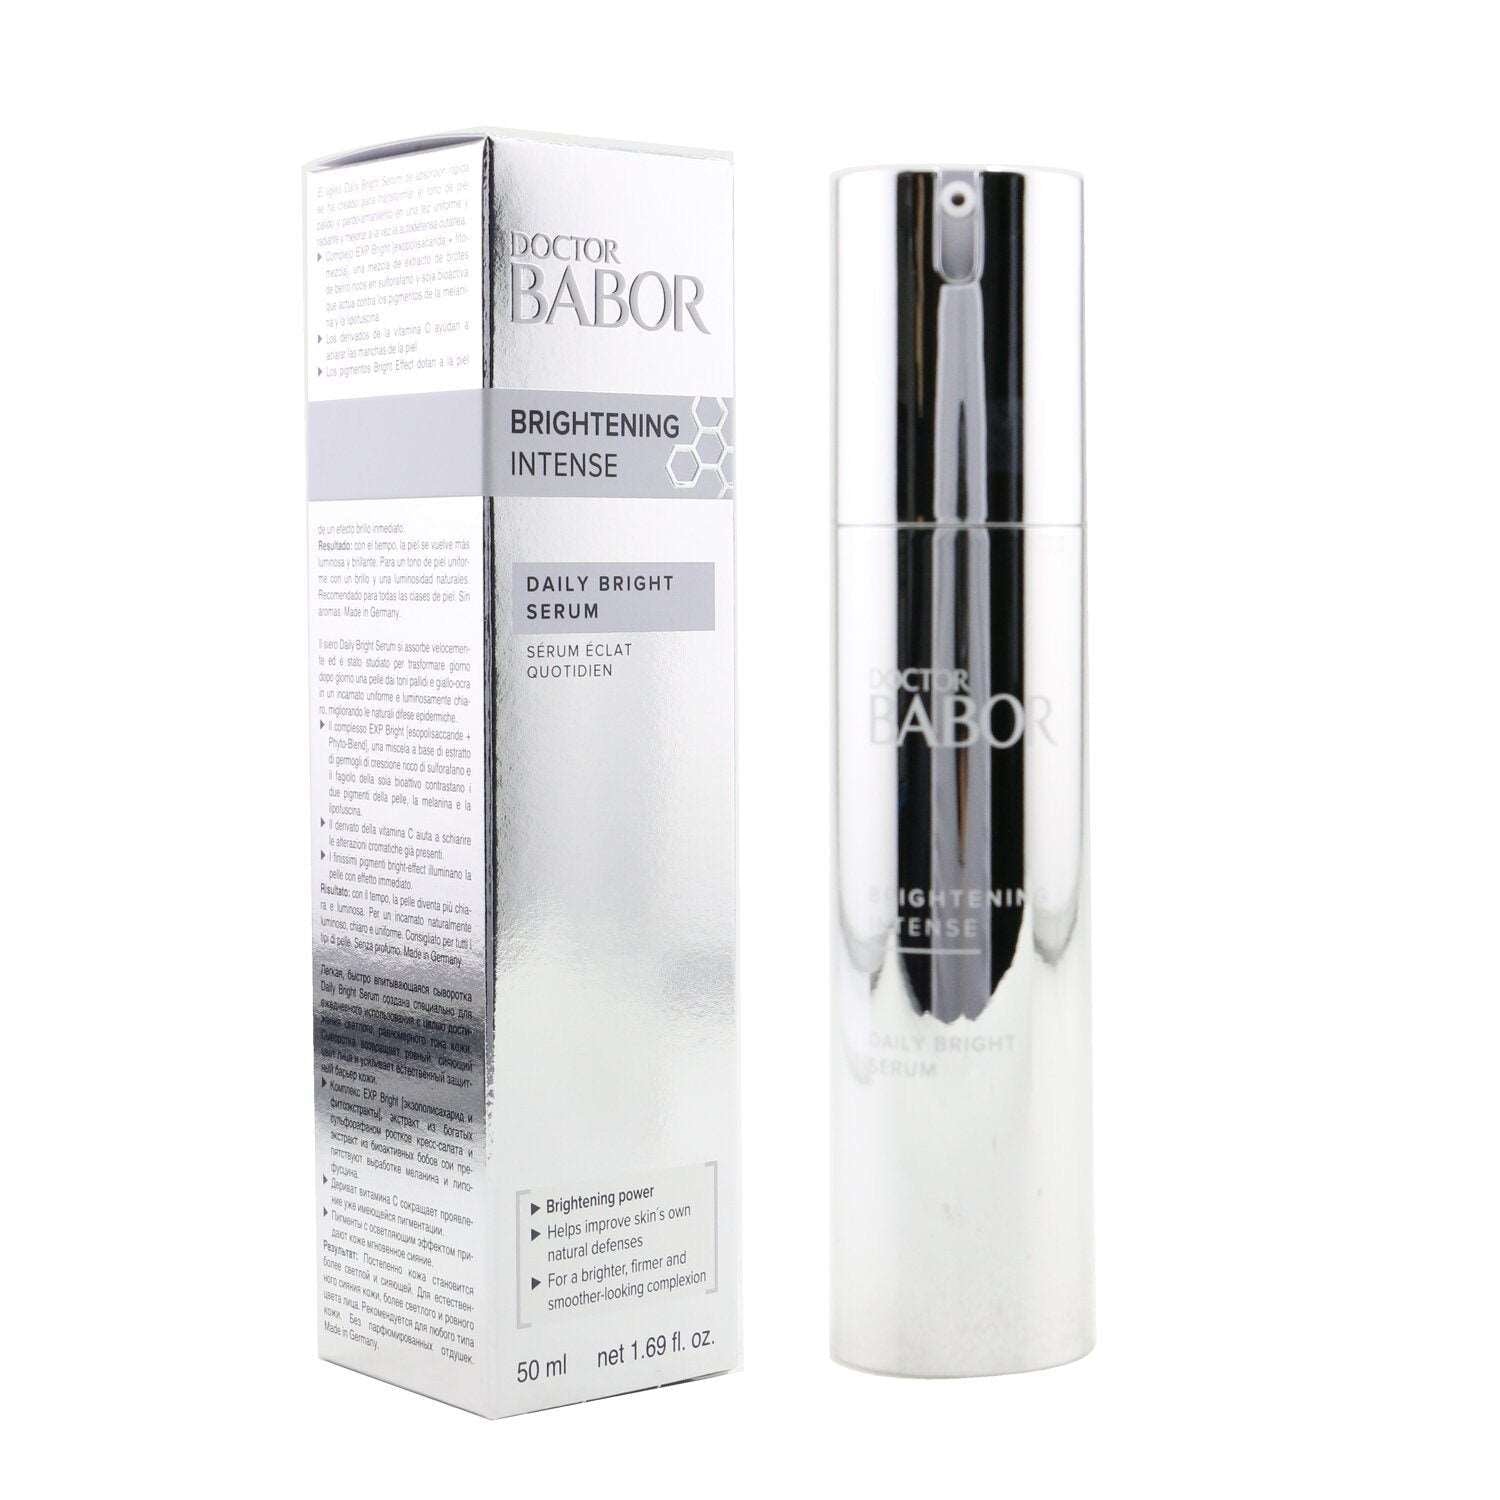 BABOR - Doctor Babor Brightening Intense Daily Bright Serum - 50ml/1.69oz 3P's Inclusive Beauty